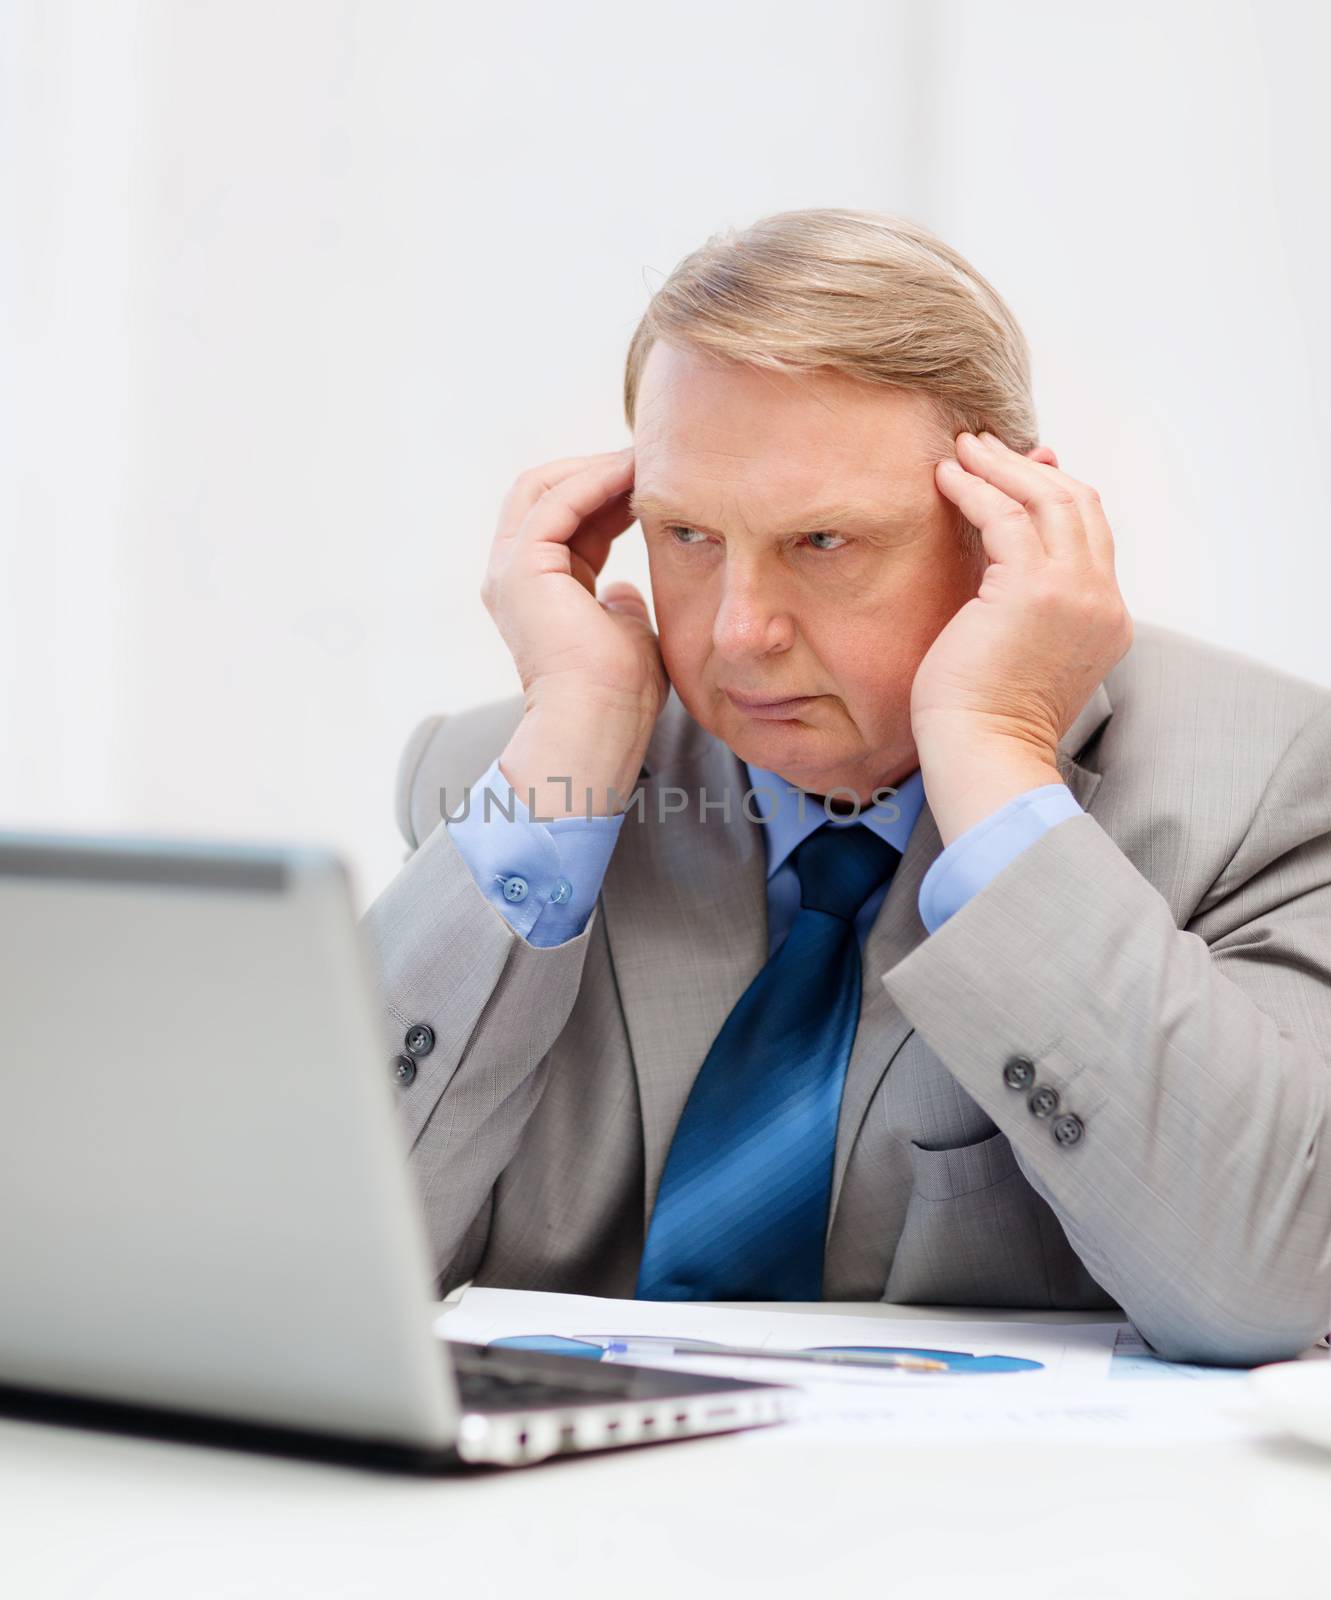 business, technology and office concept - upset older businessman with laptop and charts in office